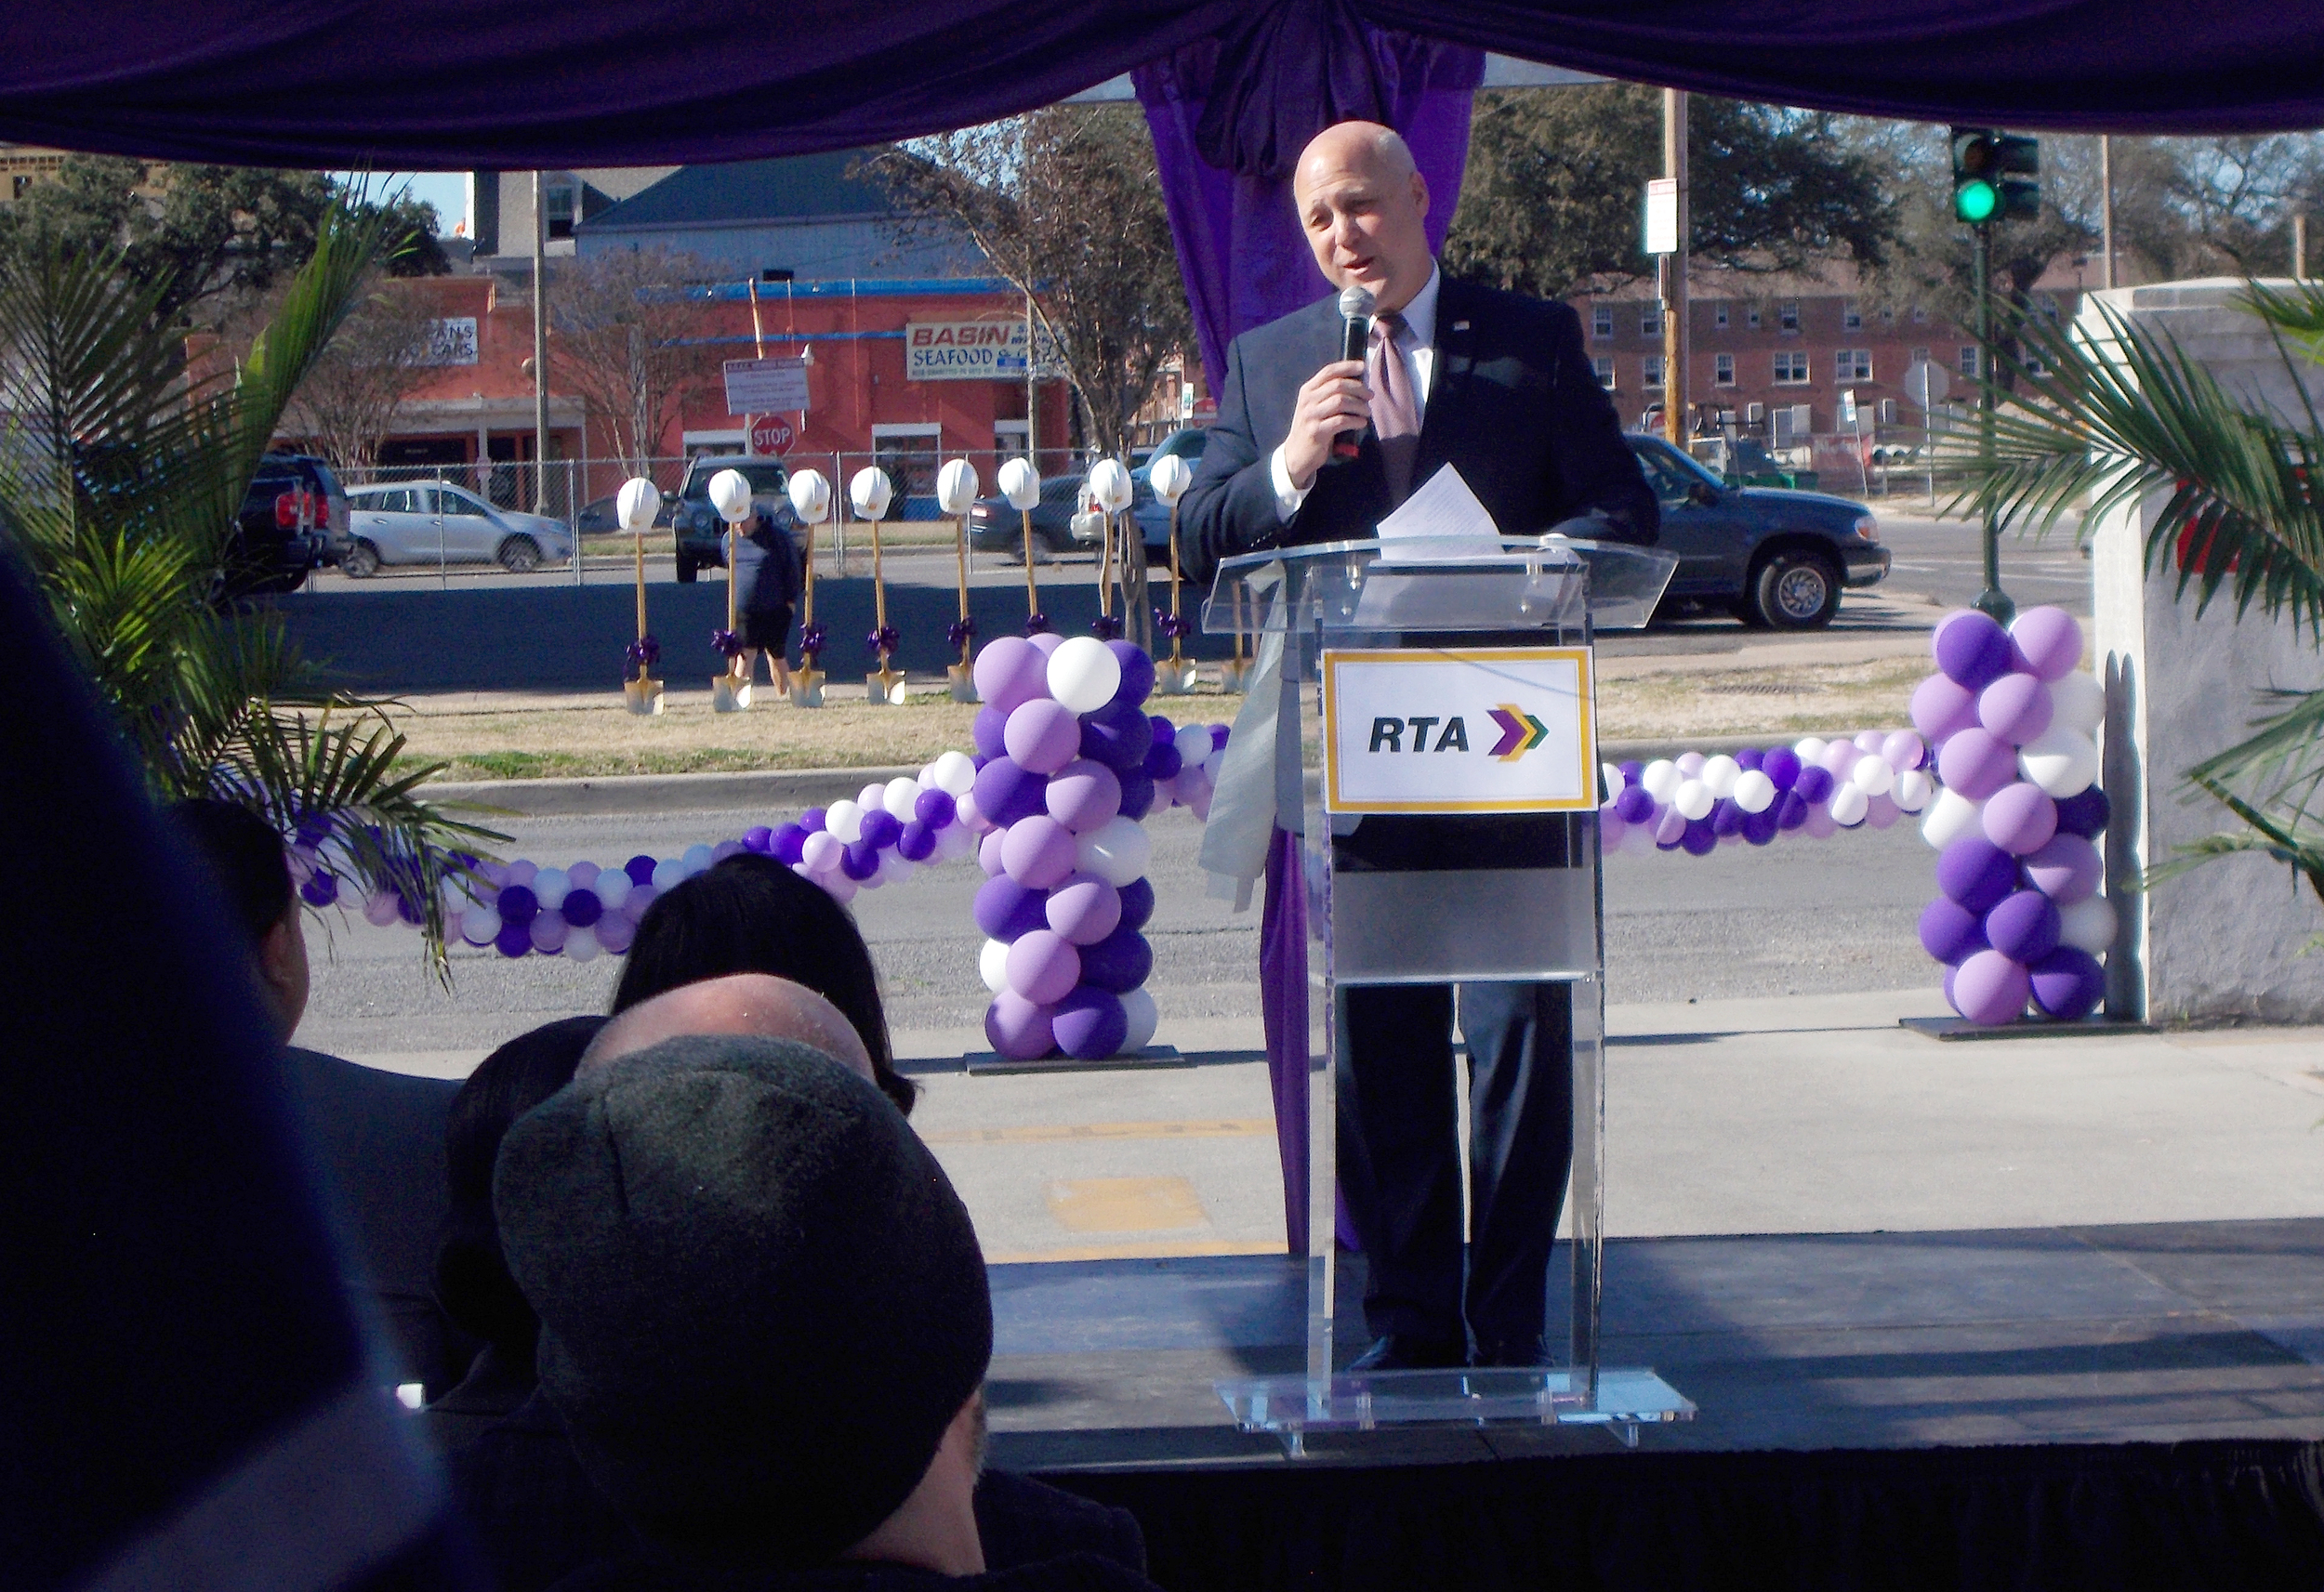  New Orleans Mayor Mitch Landrieu gives a speech at the ground breaking ceremony for the Regional Transit Authority's Rampart Streetcar Line Wednesday, January 28, 2015.&nbsp; 